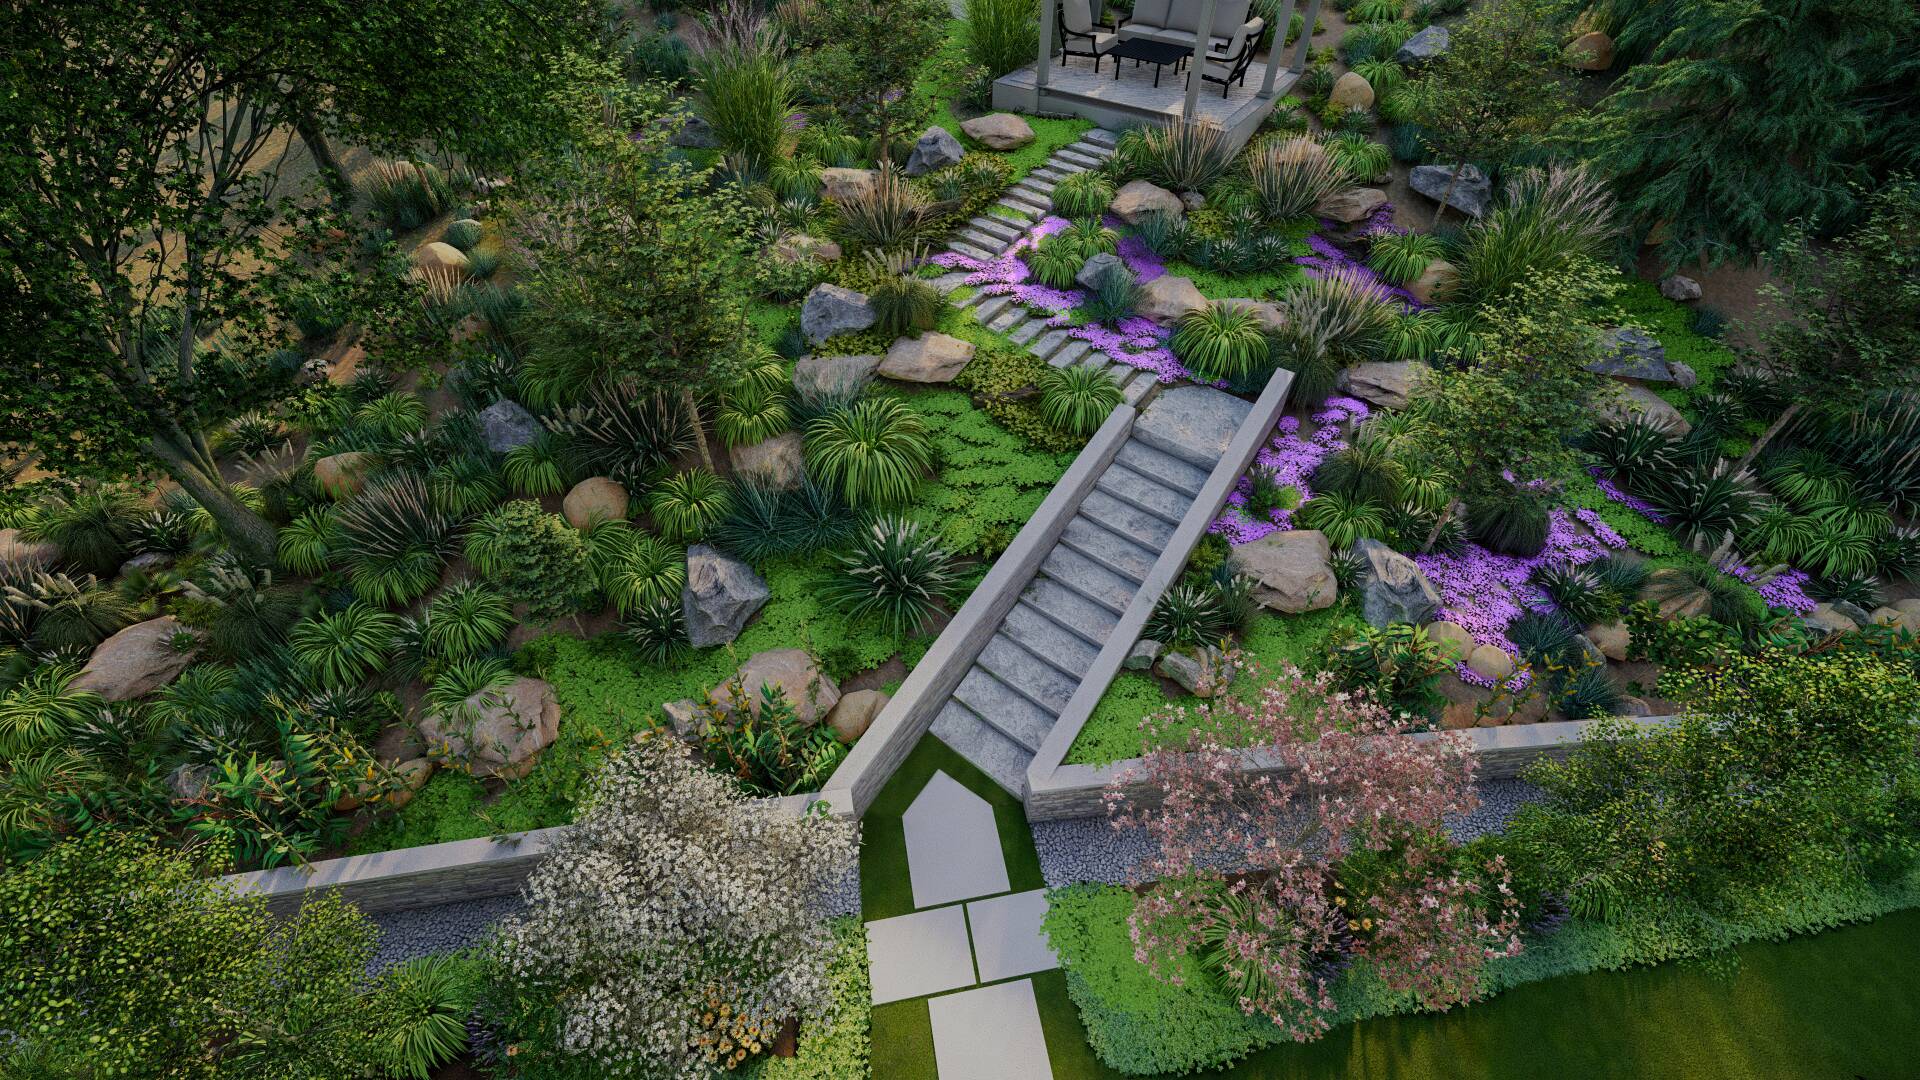 Bird's-eye view of a terraced garden landscape with stone steps, a variety of green plants, blooming purple flowers, boulders, and a shaded seating area.